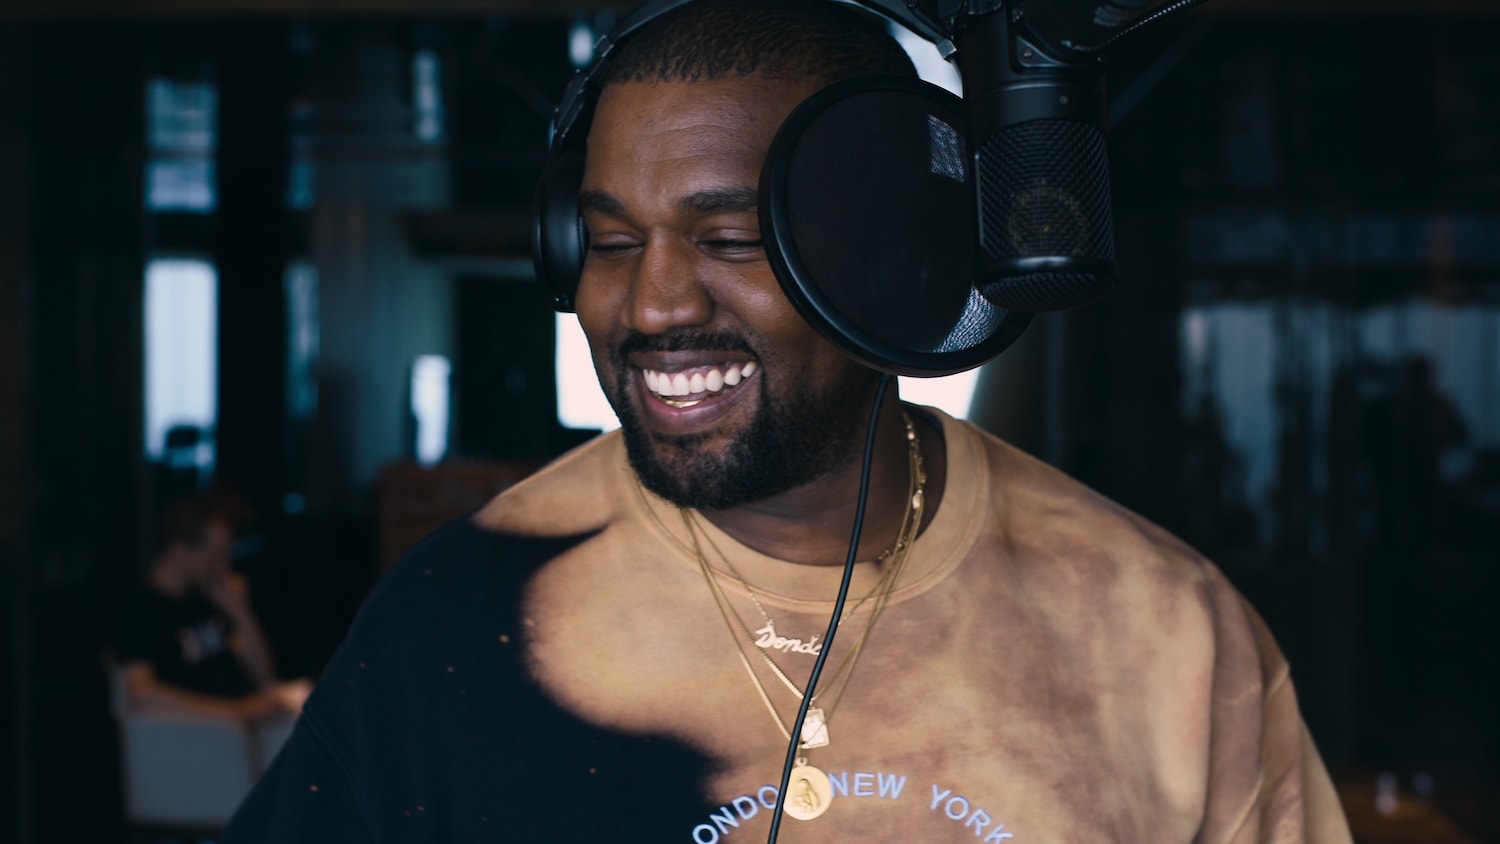 Kanye West jeen yuhs Documentary Interview